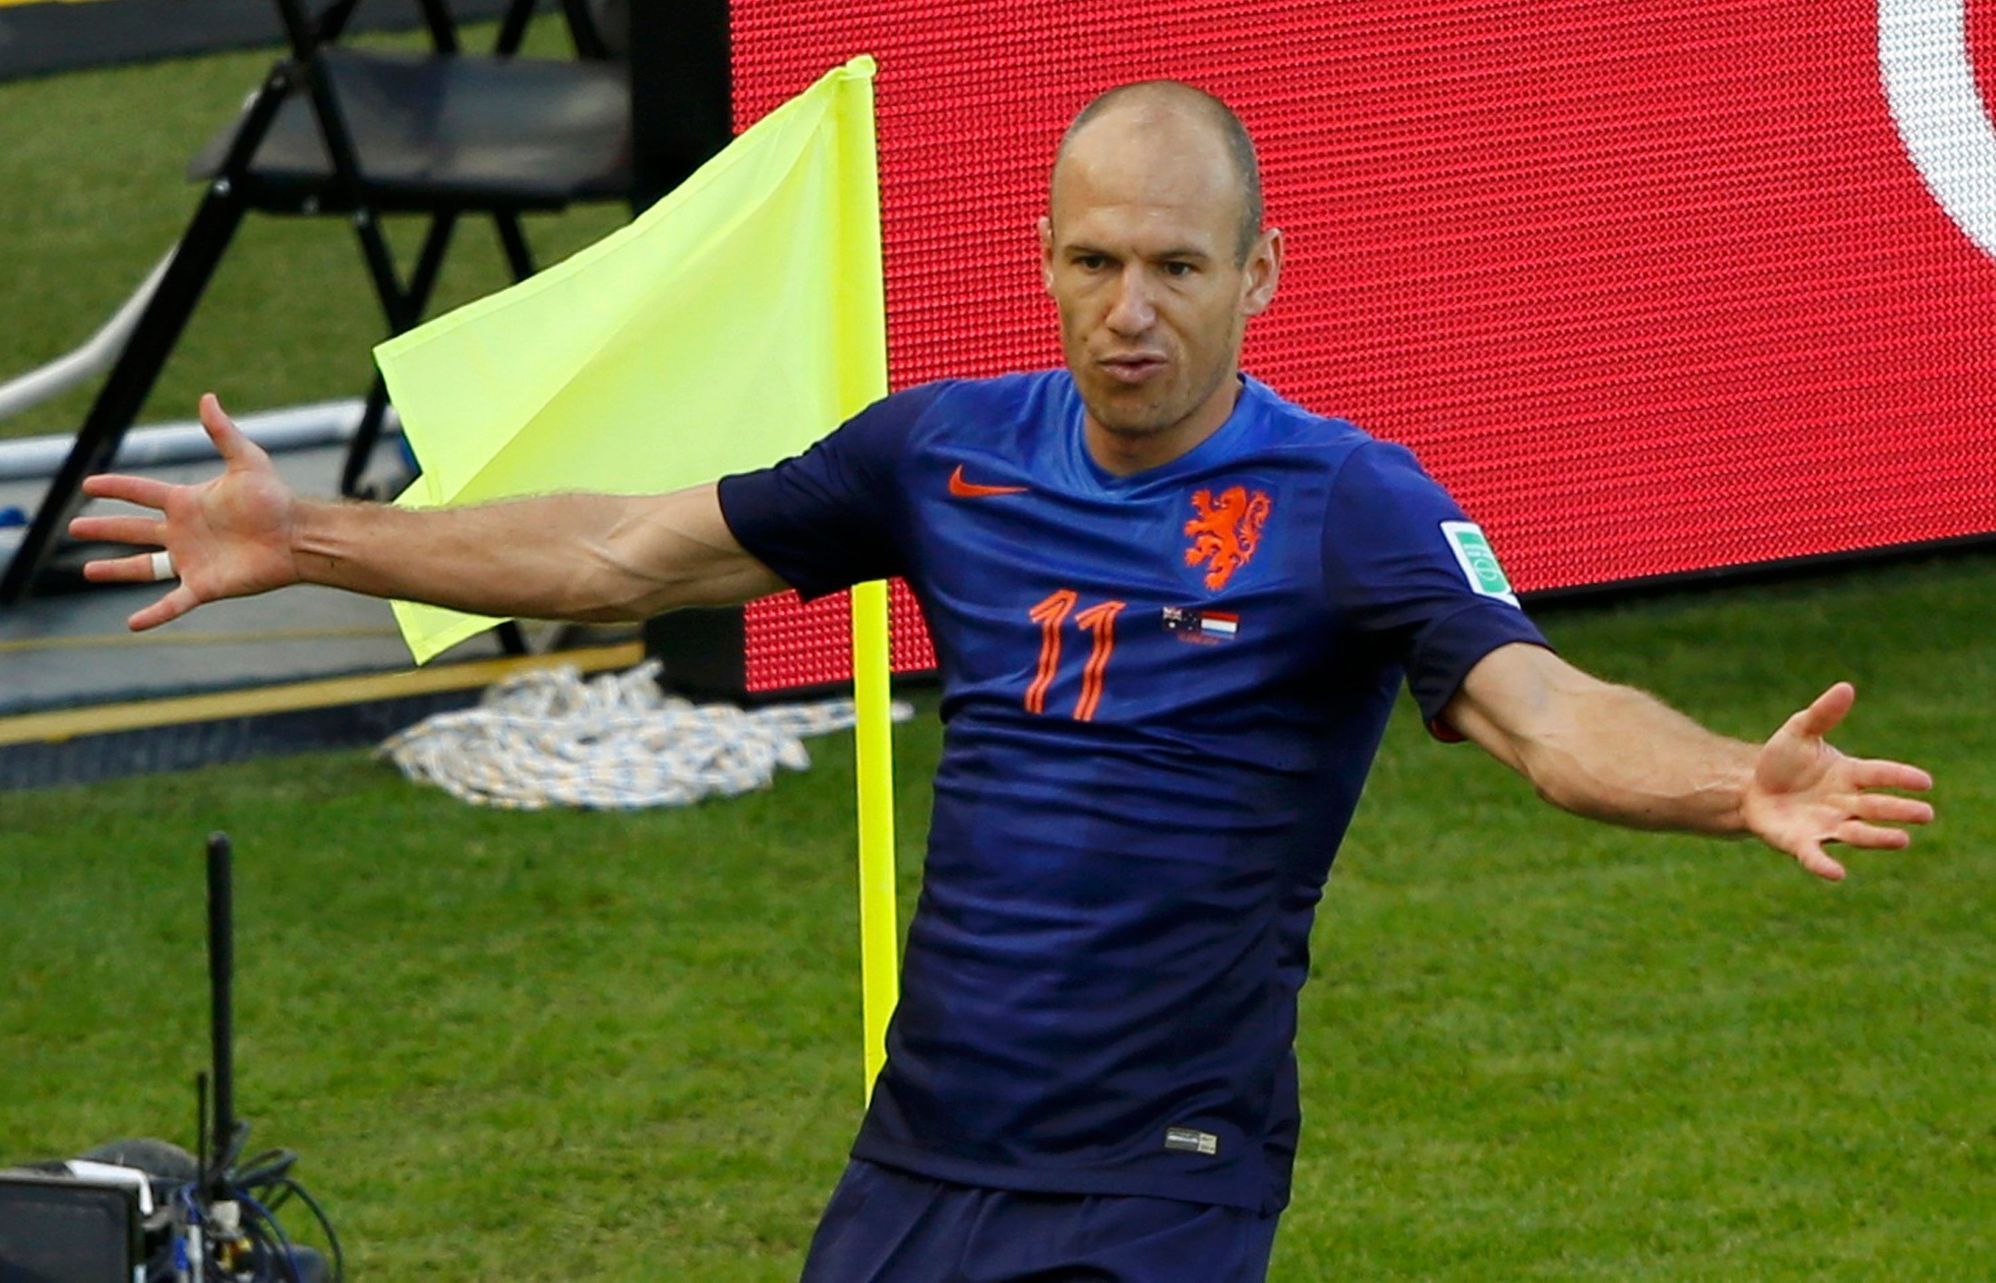 Robben of the Netherlands celebrates after scoring a goal against Australia during their 2014 World Cup Group B soccer match at the Beira Rio stadium in Porto Alegre